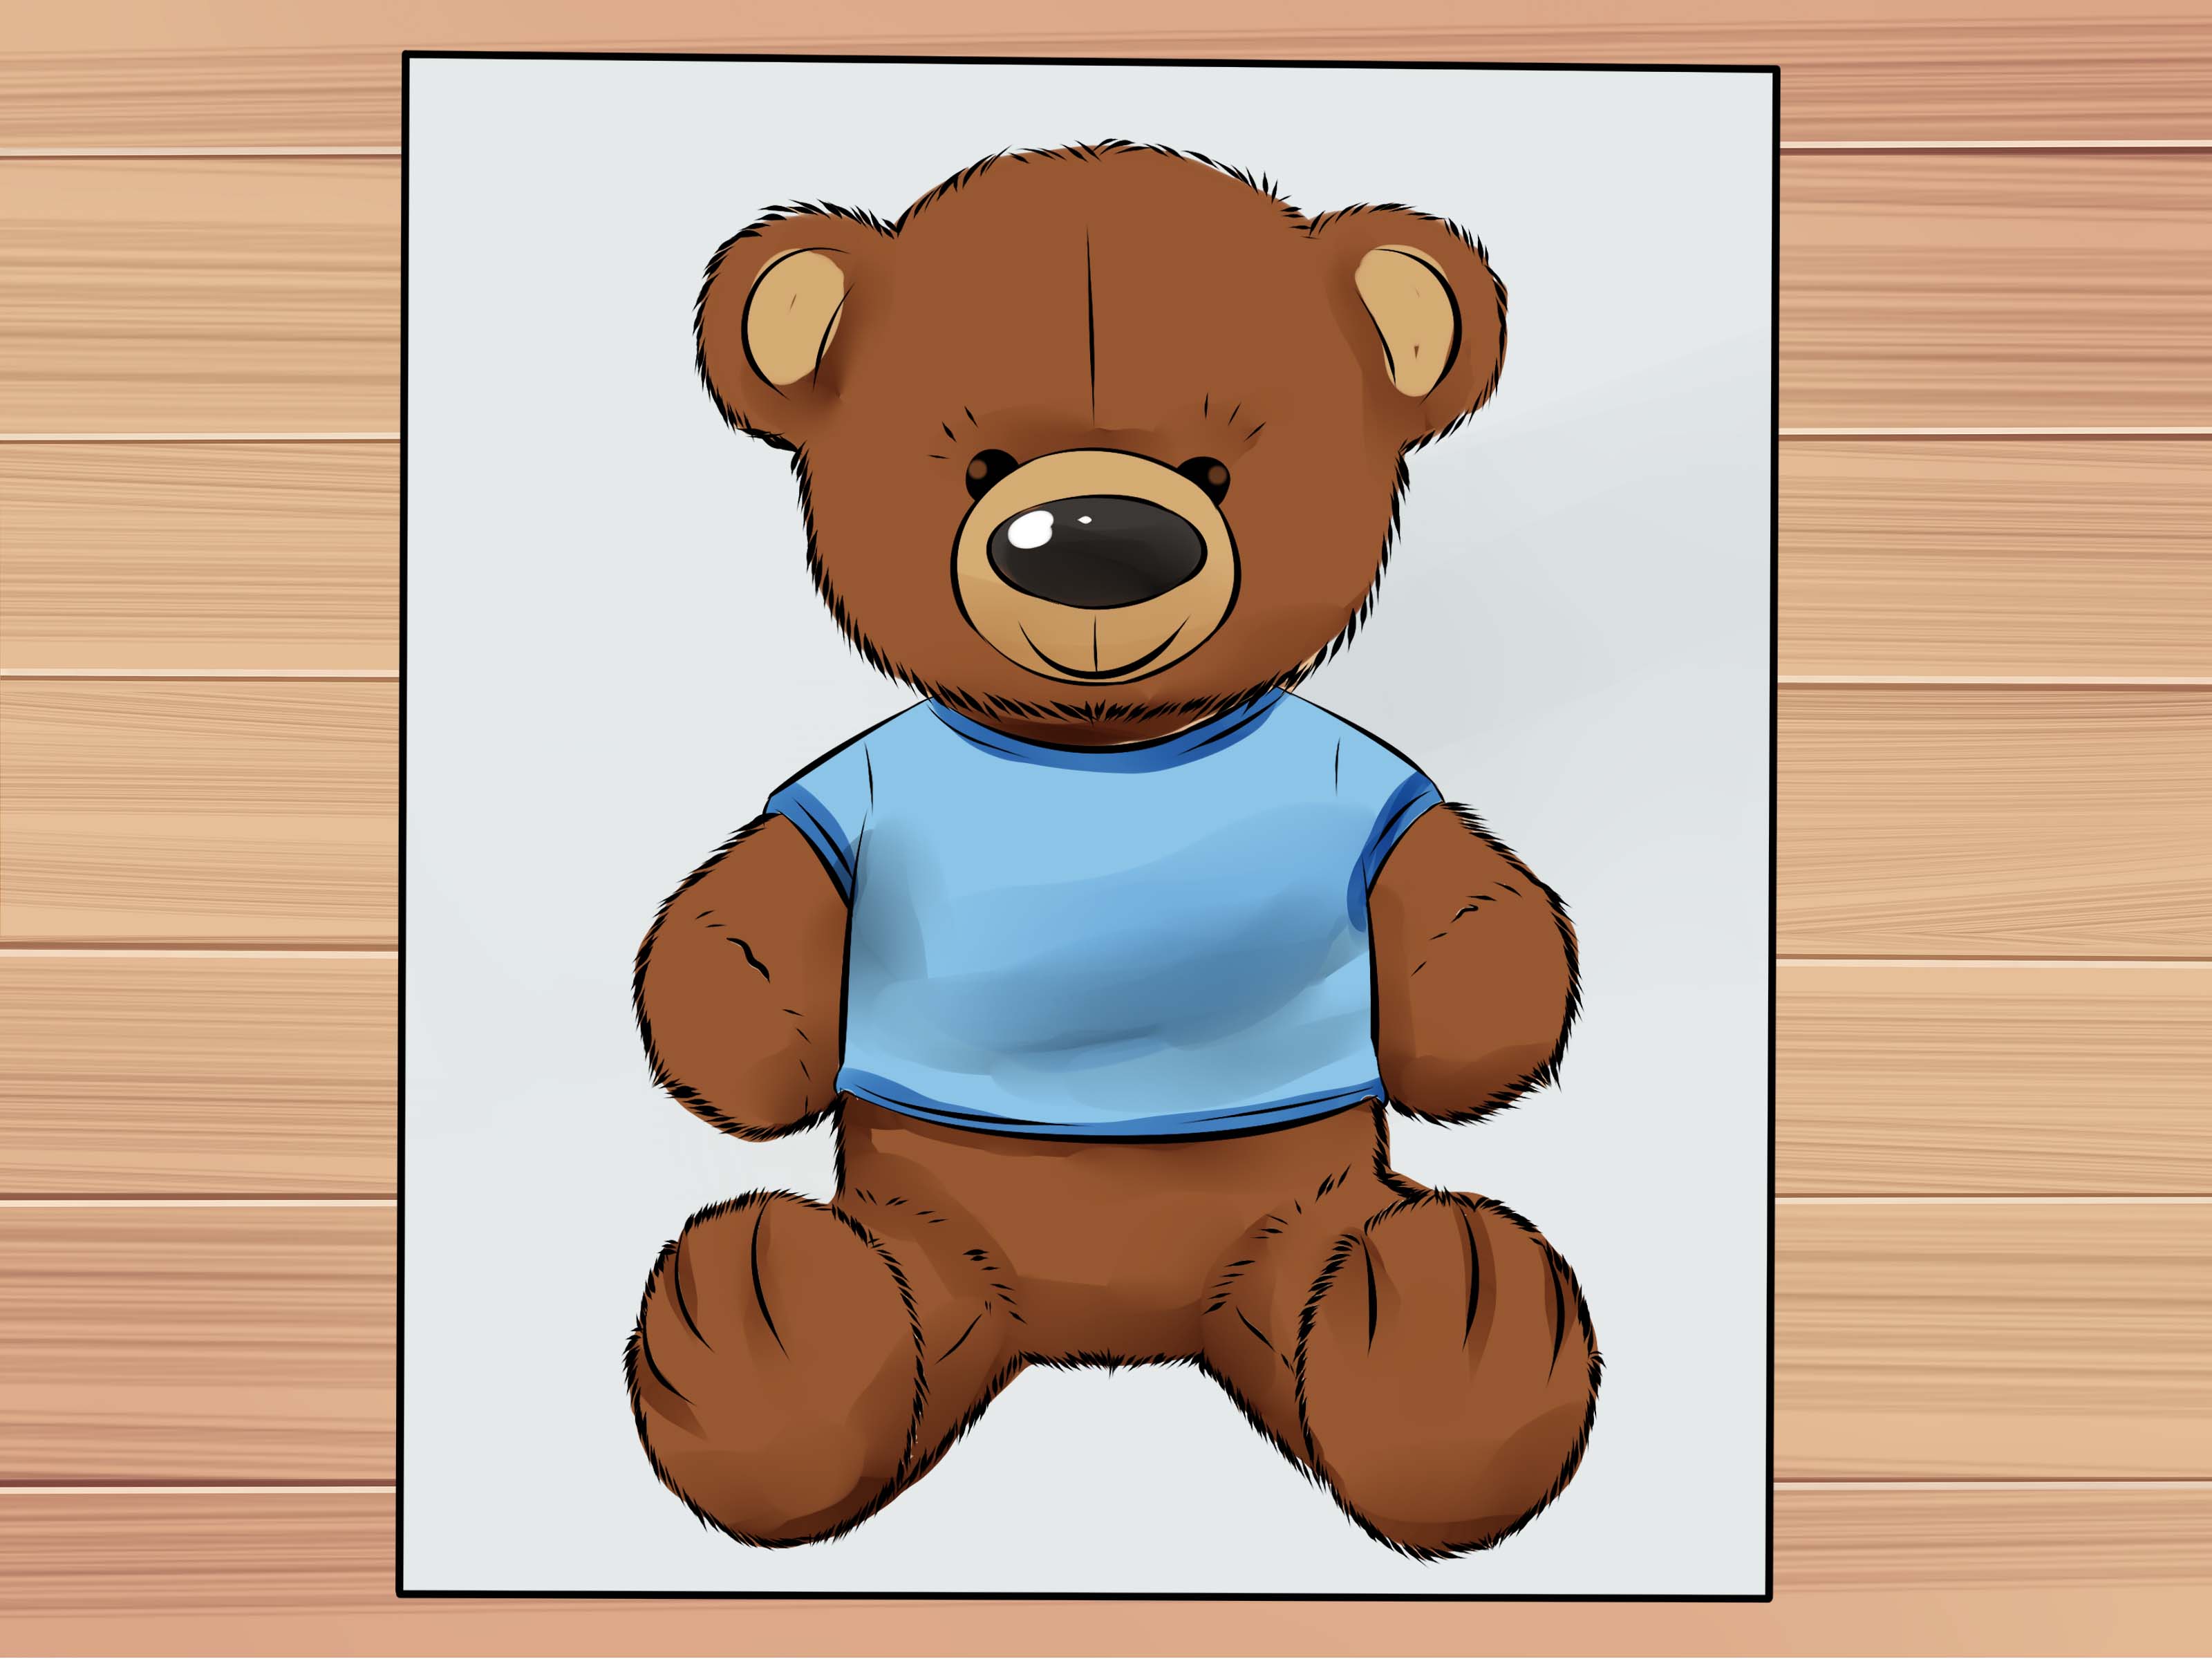 Image Titled Draw A Teddy Bear Step - Teddy Bear Drawing With Shirt - HD Wallpaper 